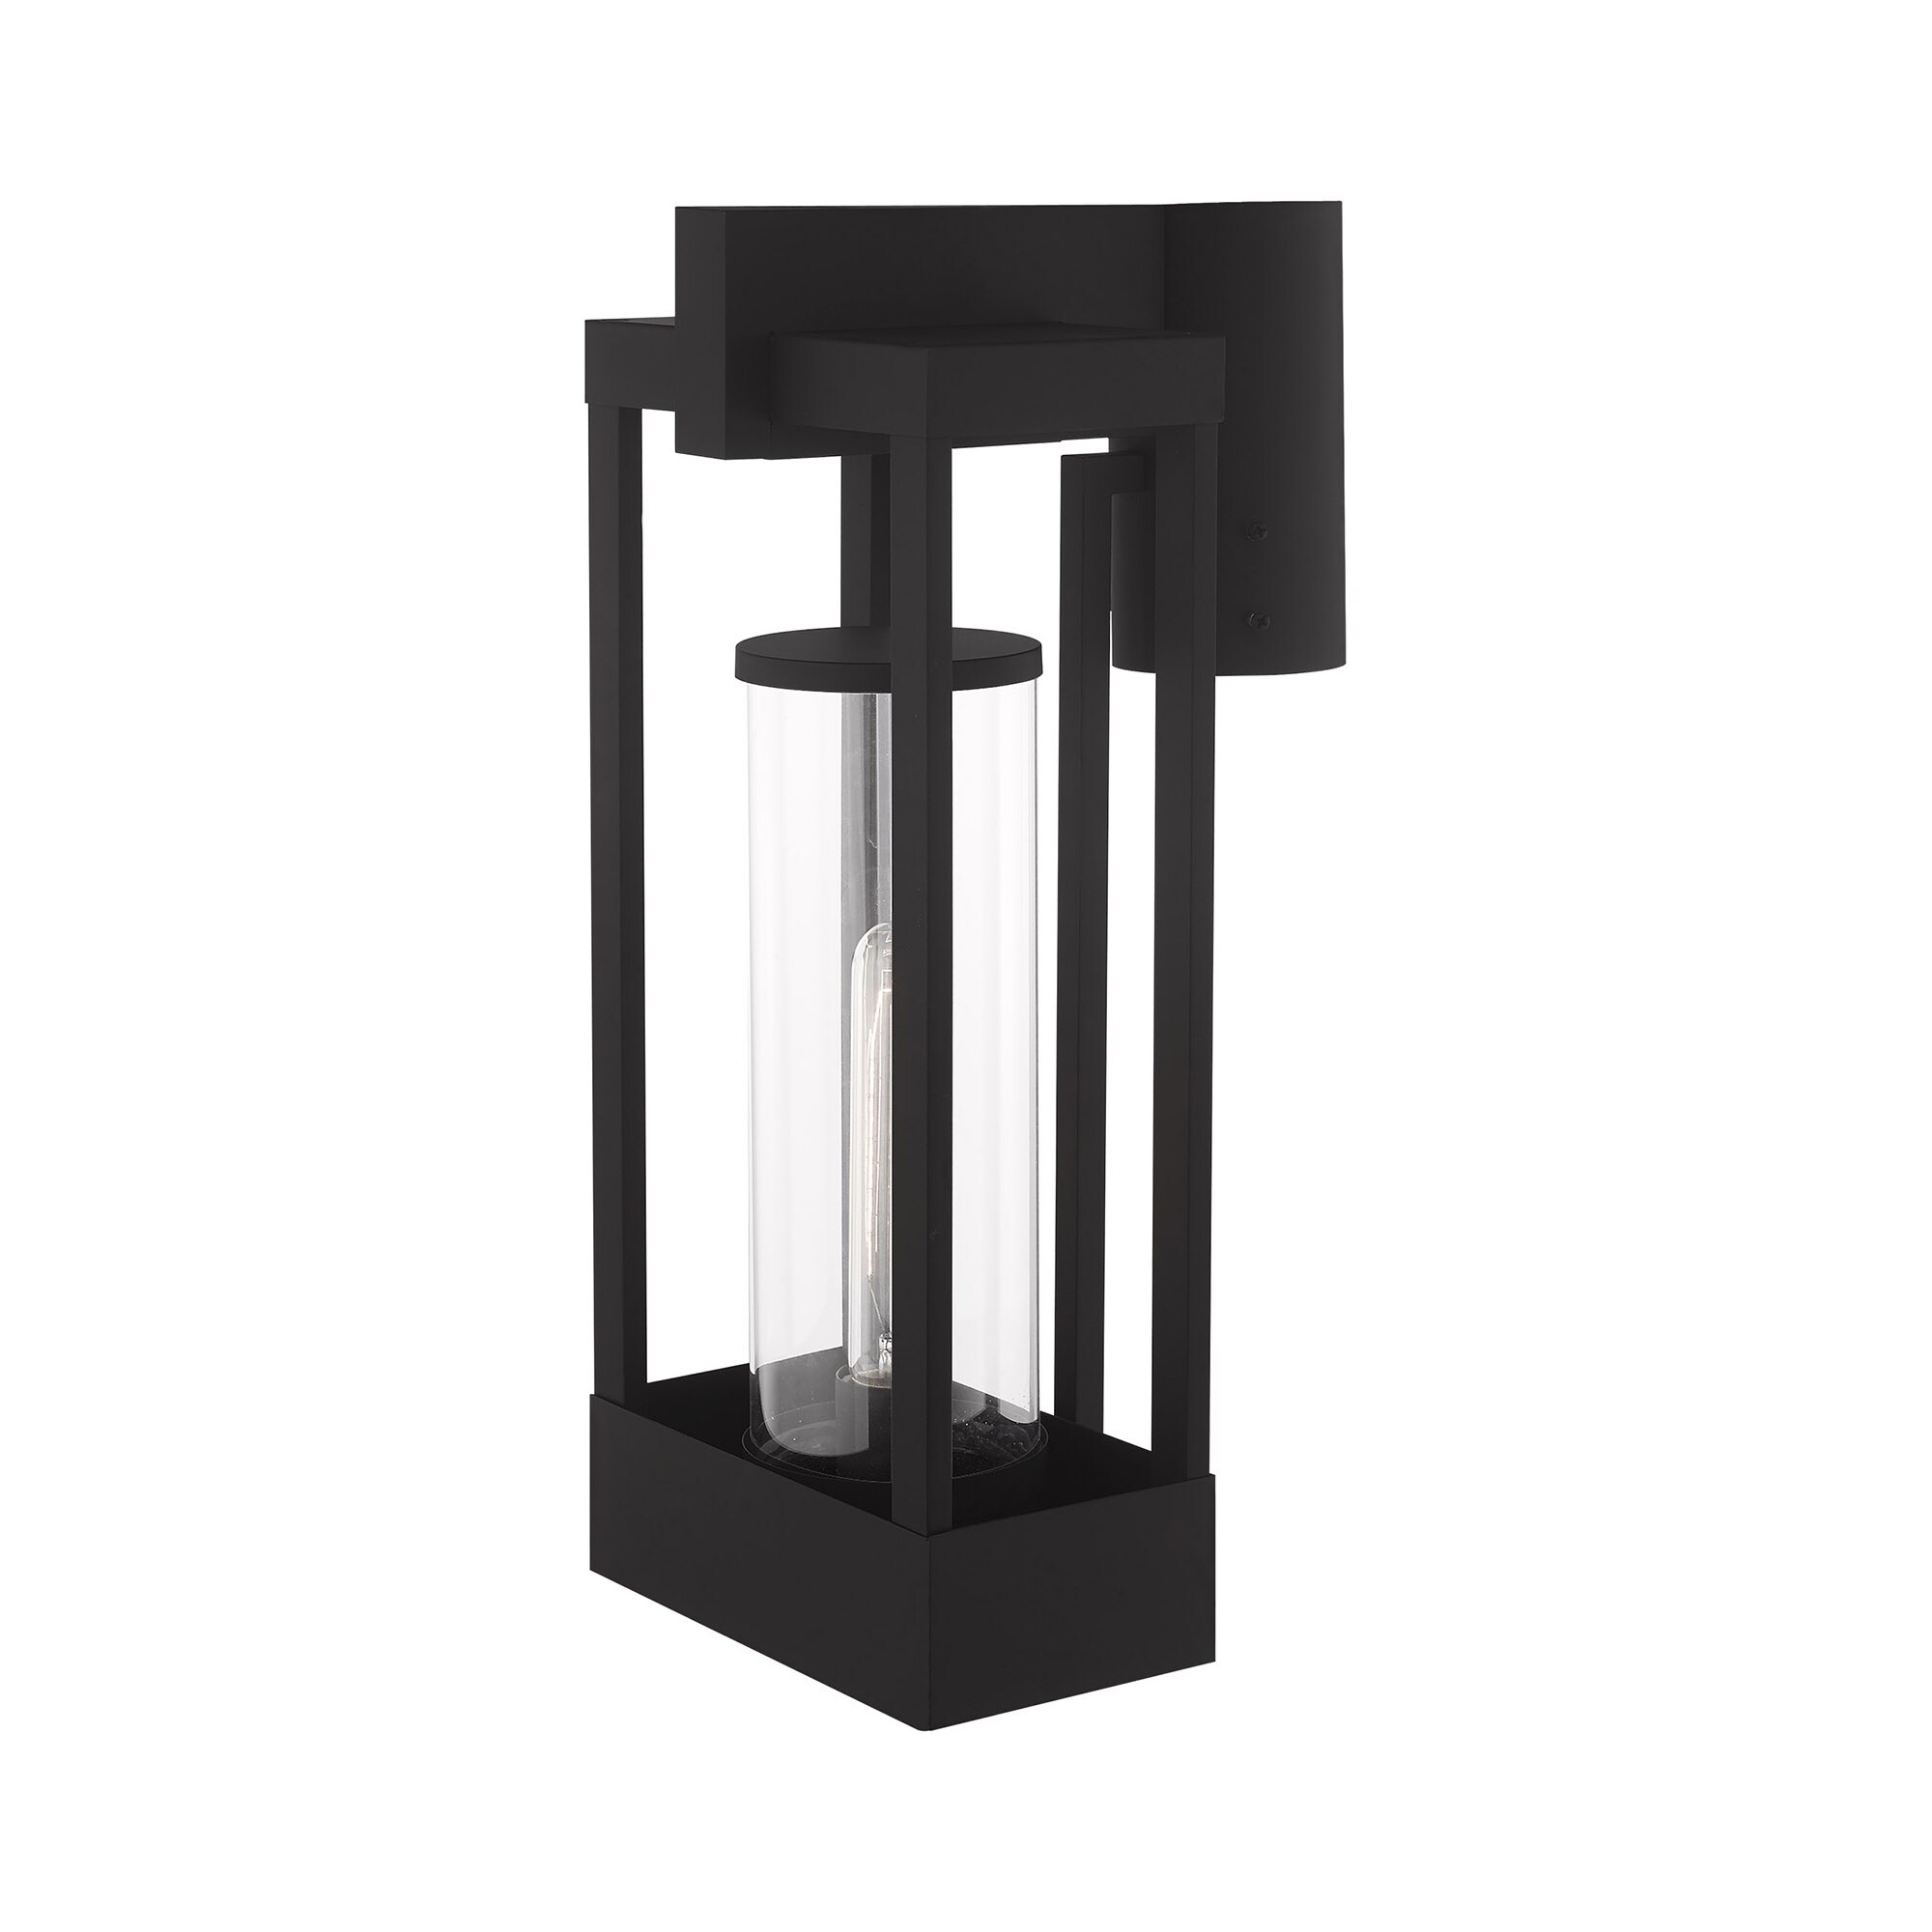 Livex Lighting - Delancey - 1 Light Outdoor Post Top Lantern in Contemporary - image 5 of 5